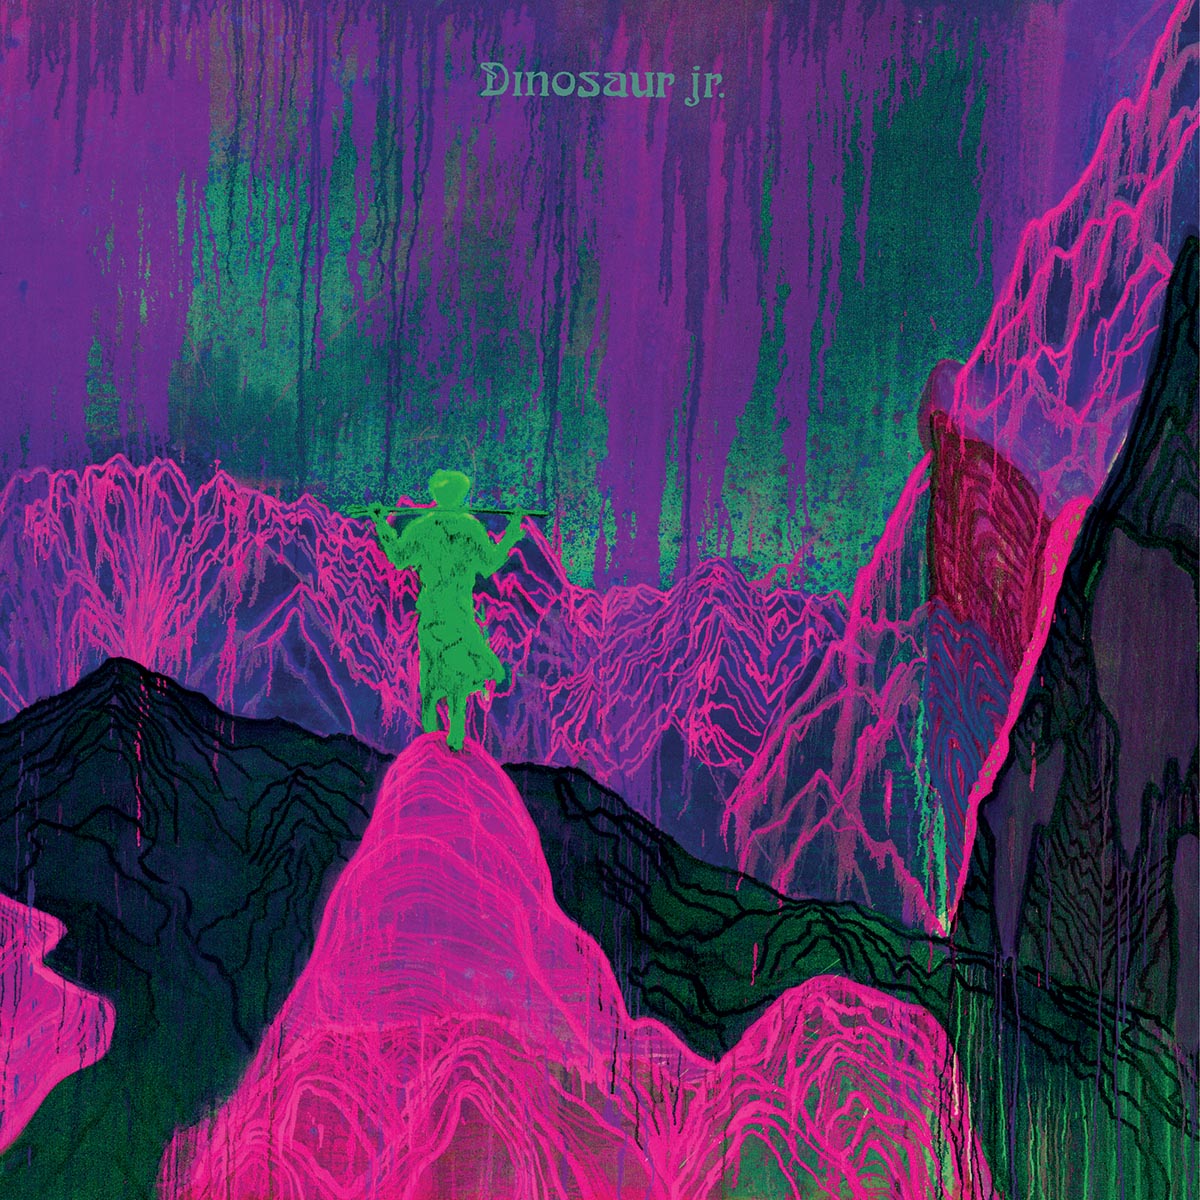 Dinosaur Jr. - Give A Glimpse Of What Yer Not - LP